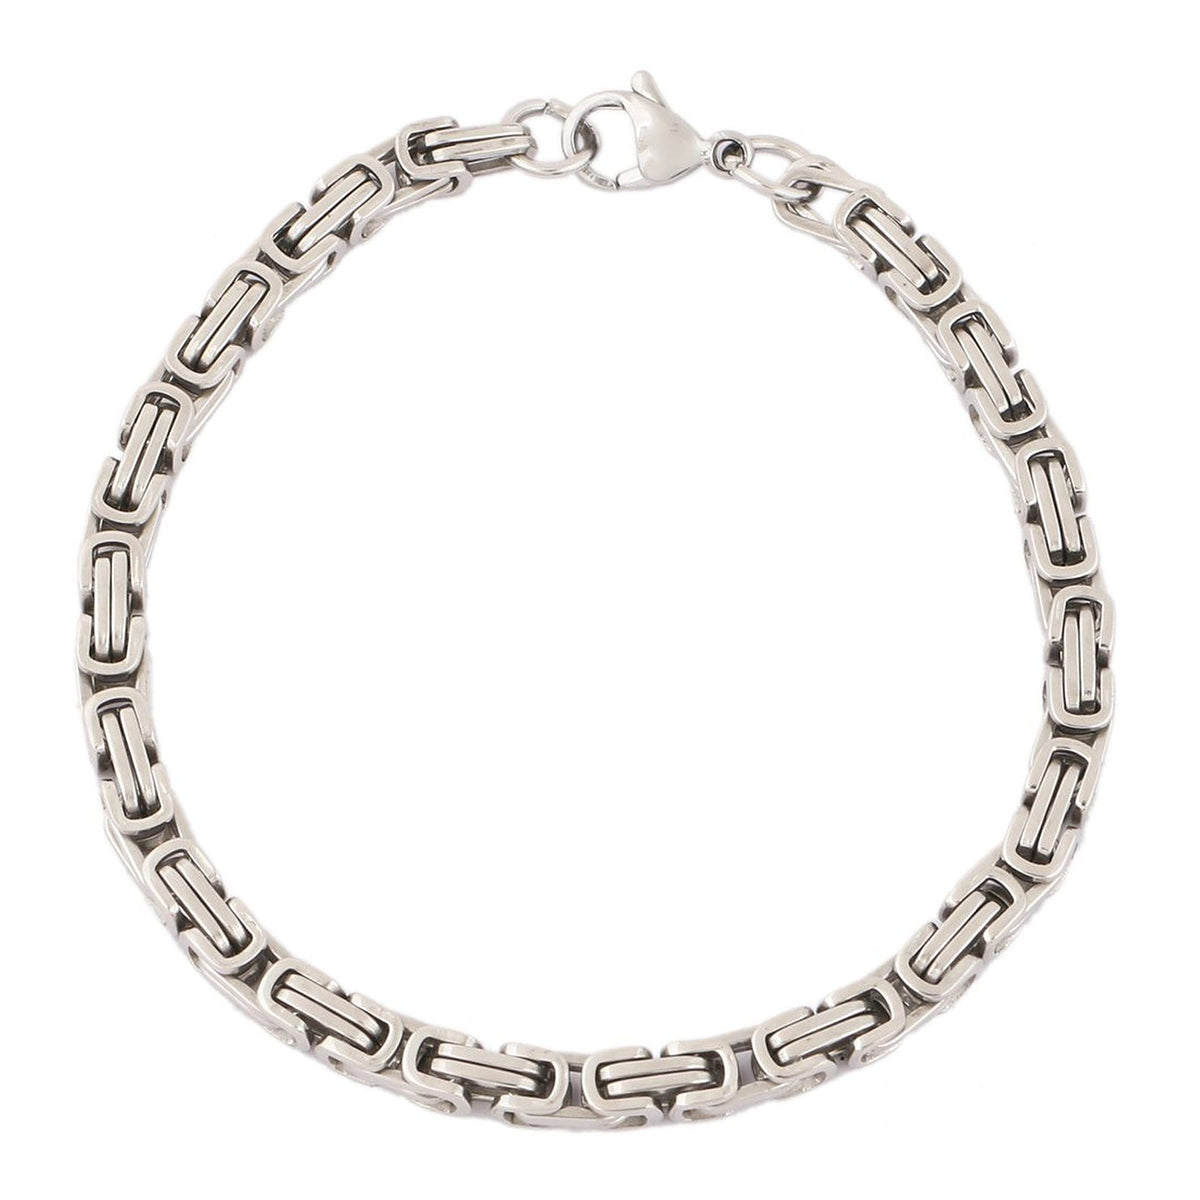 Surgical Stainless Steel Rhodium Plated Byzantine Bracelet For Men